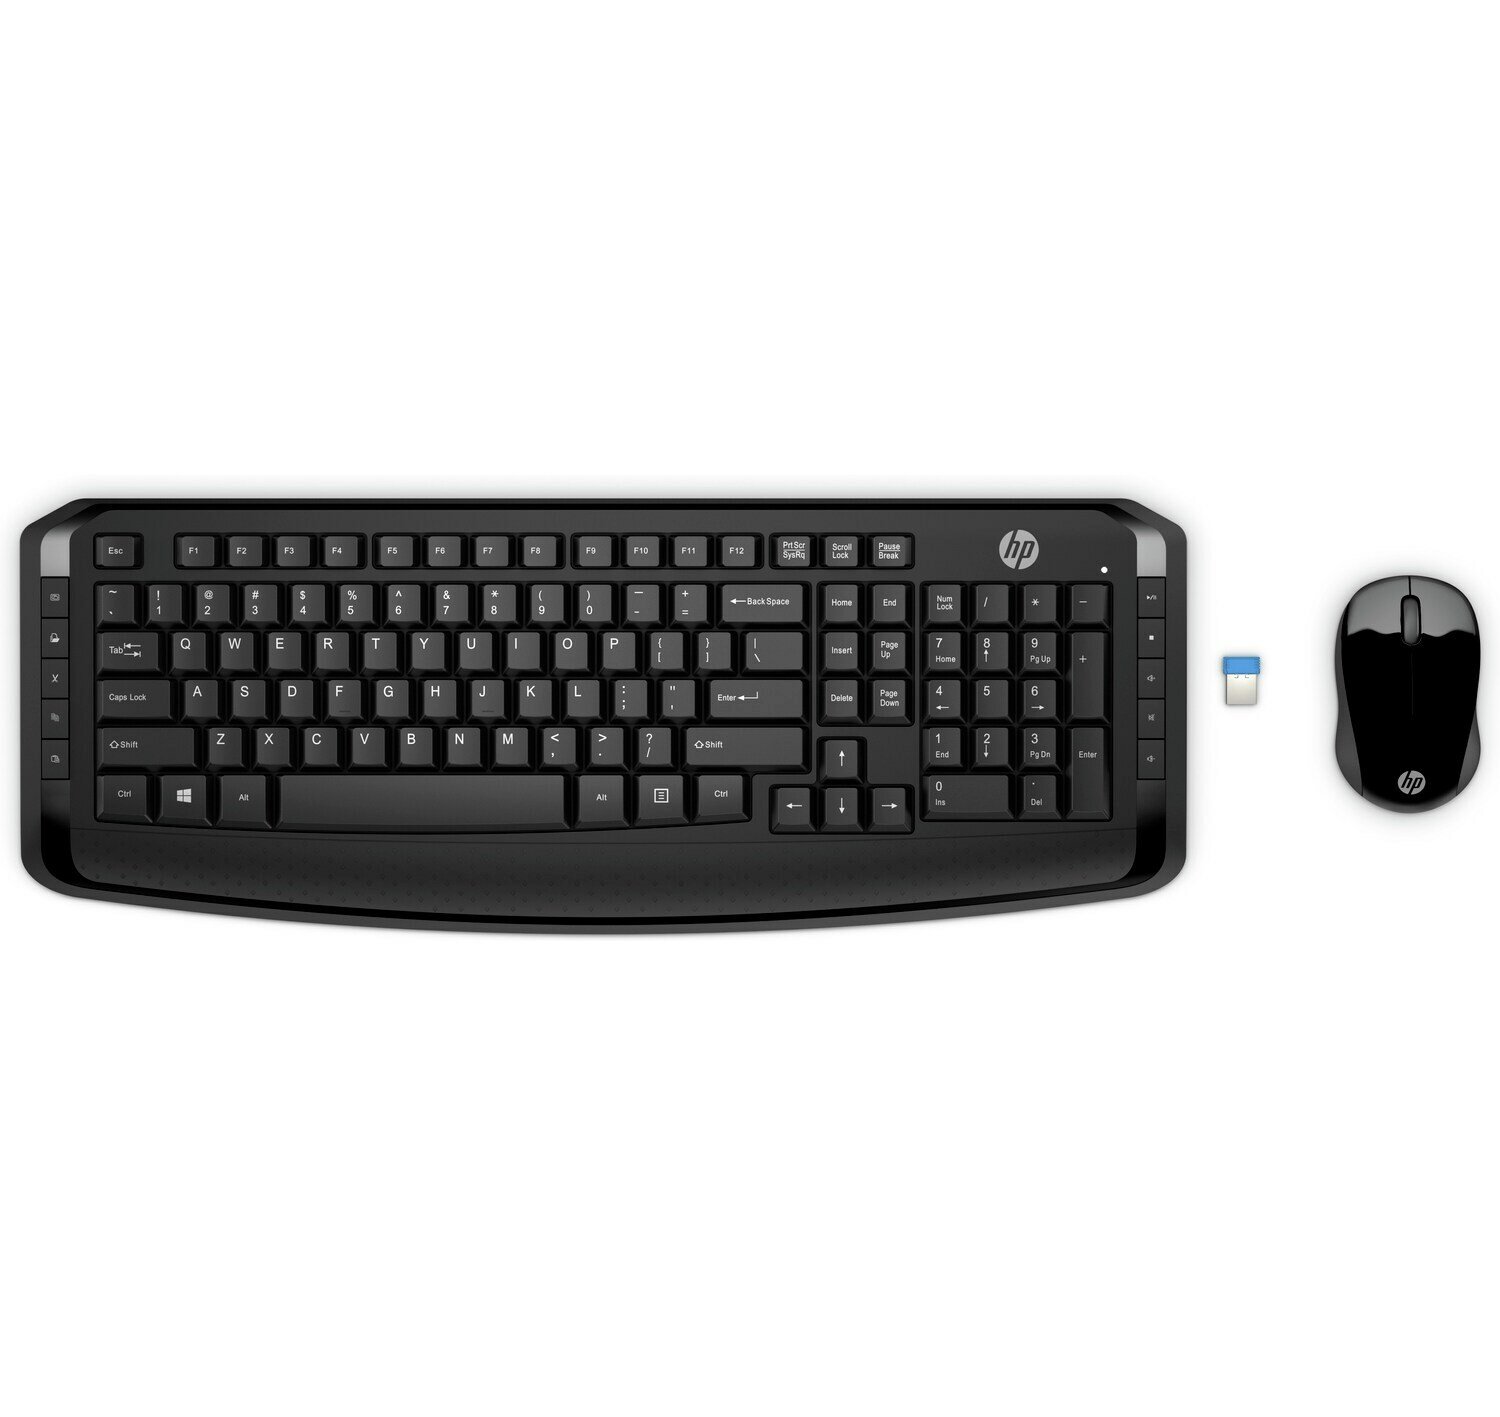 HP 300 Wireless Mouse and Keyboard Set Review